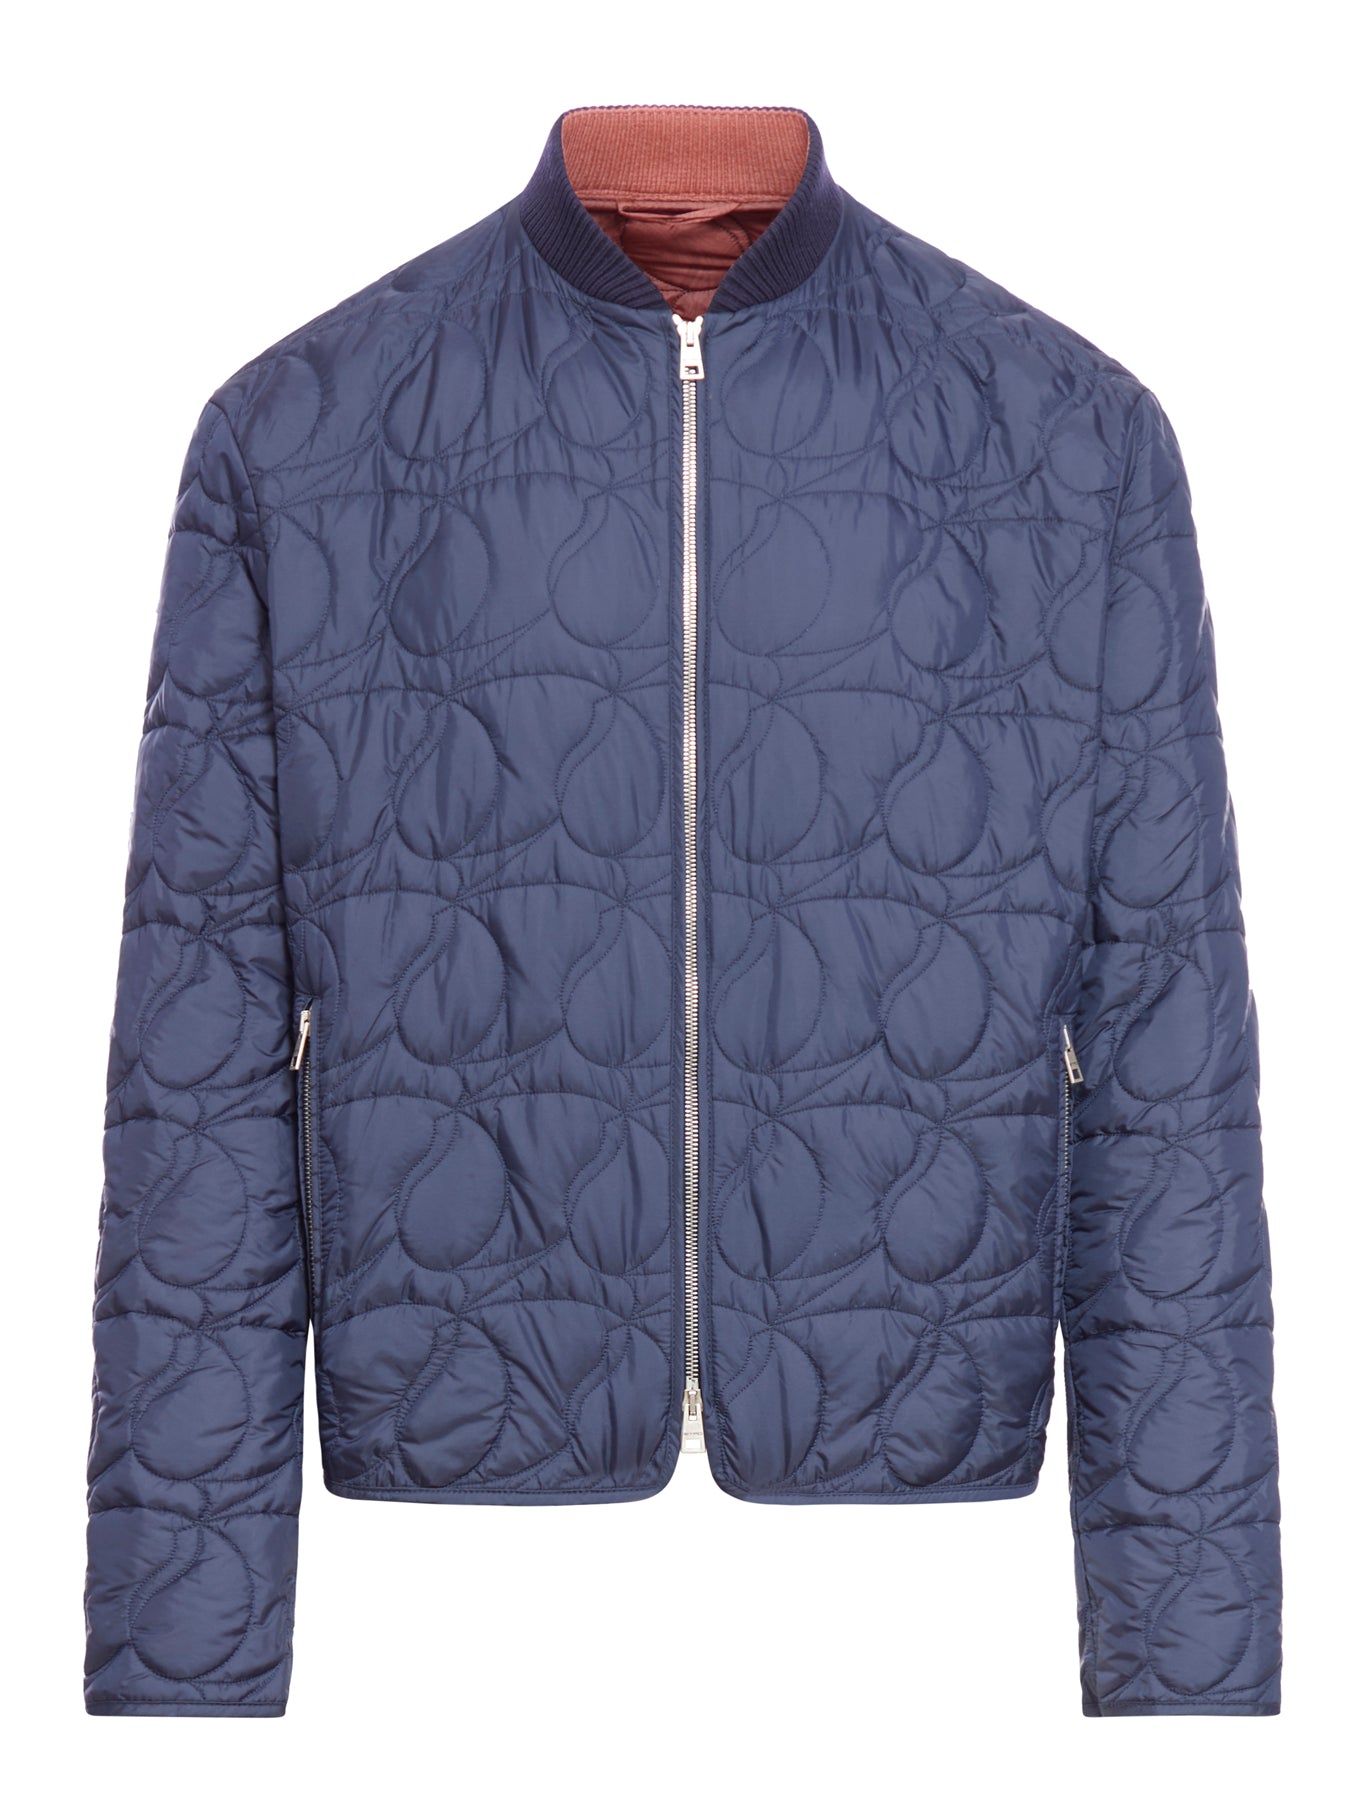 QUILTED PAISLEY BOMBER JACKET